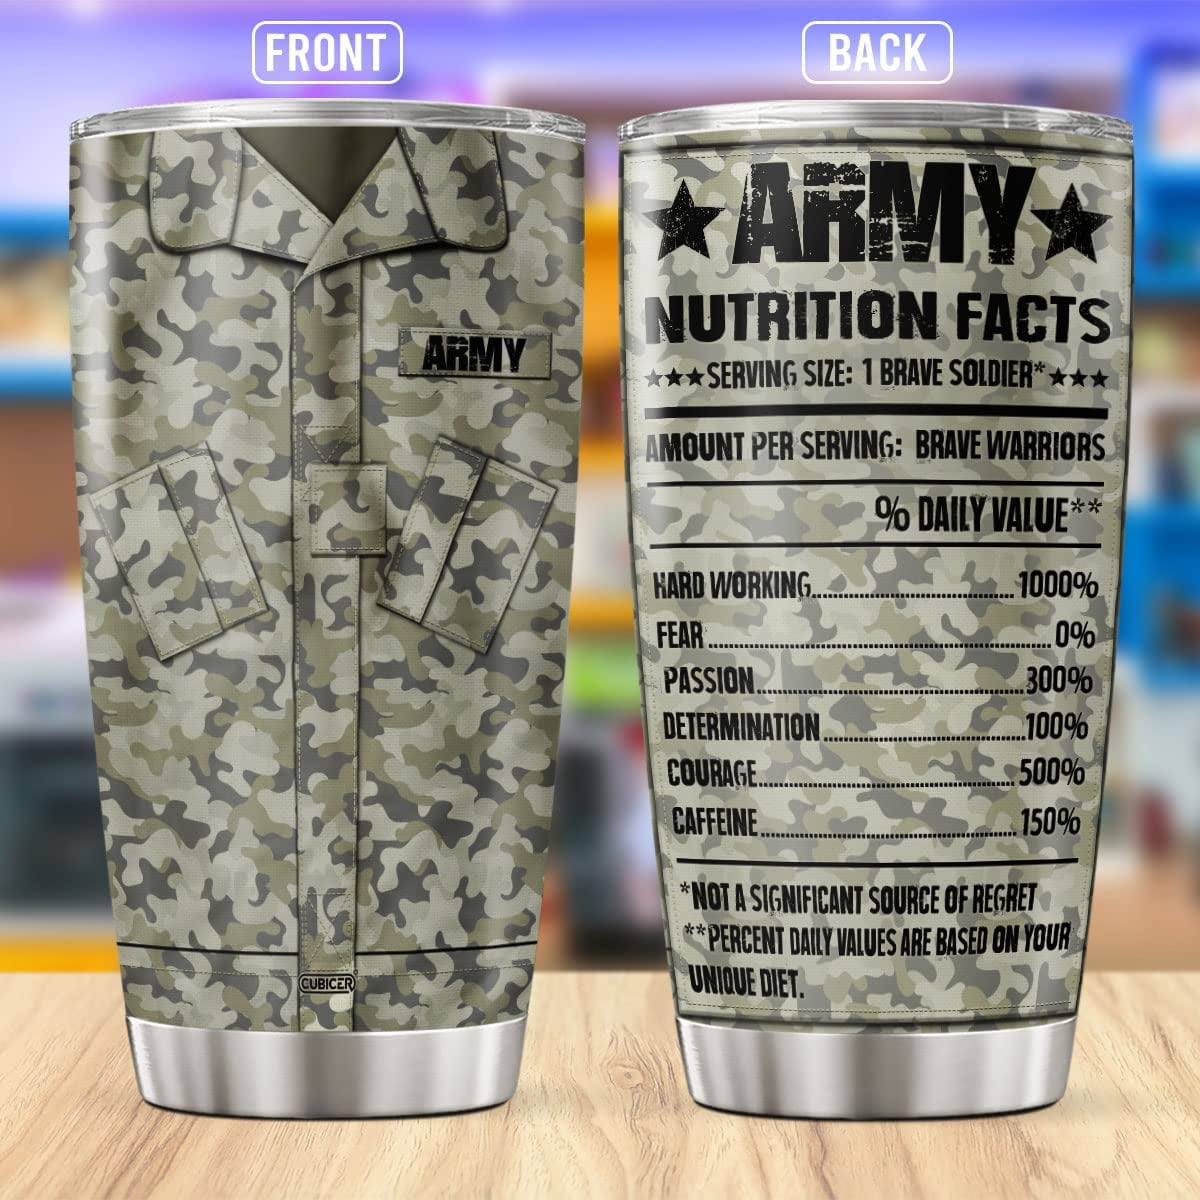 ORSM – Yeti Introduces Tumbler Handle and Straw Lid - Soldier Systems Daily